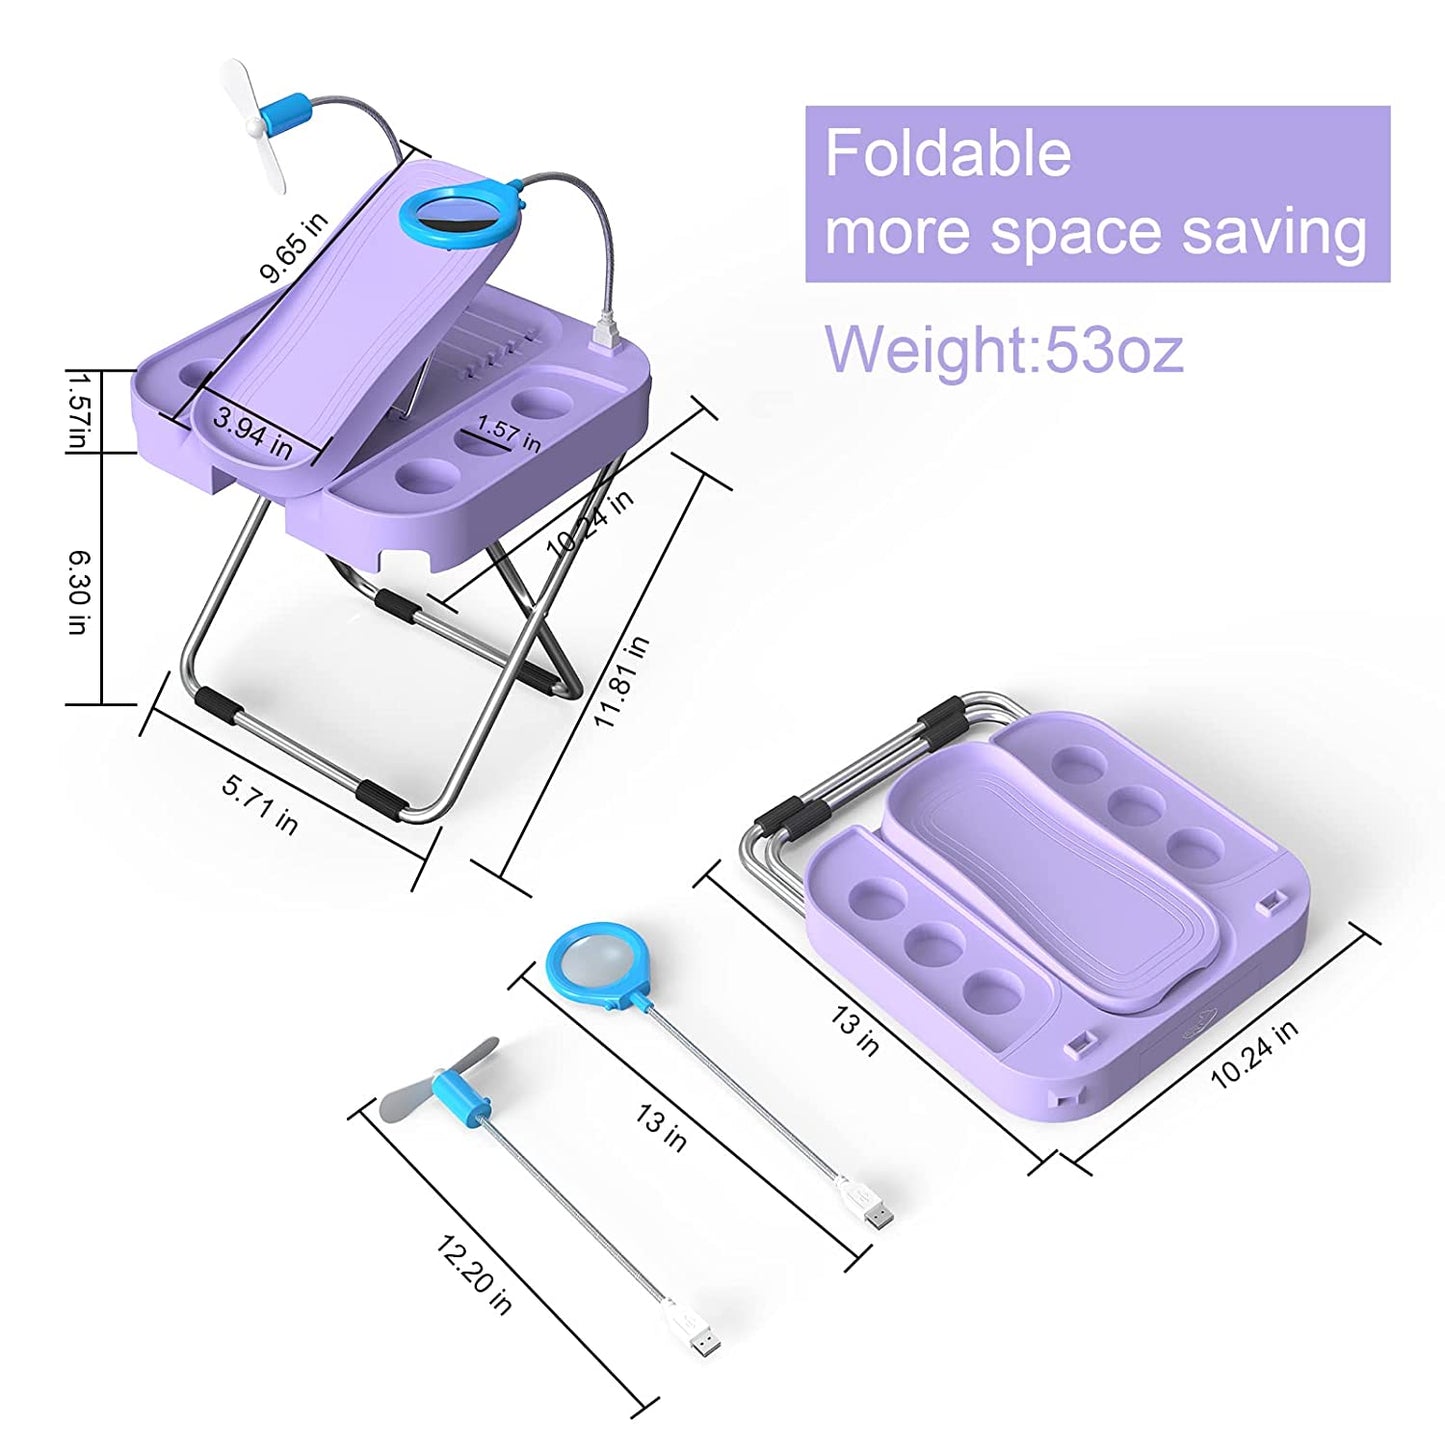 Pedicure Foot Rest with LED Magnifier and Drying Fan, Adjustable Foot Rest, Reinforced and Thickened,Stable and Easy for Pedicures at Home, with Storage Box,Beauty Pedicure Kit